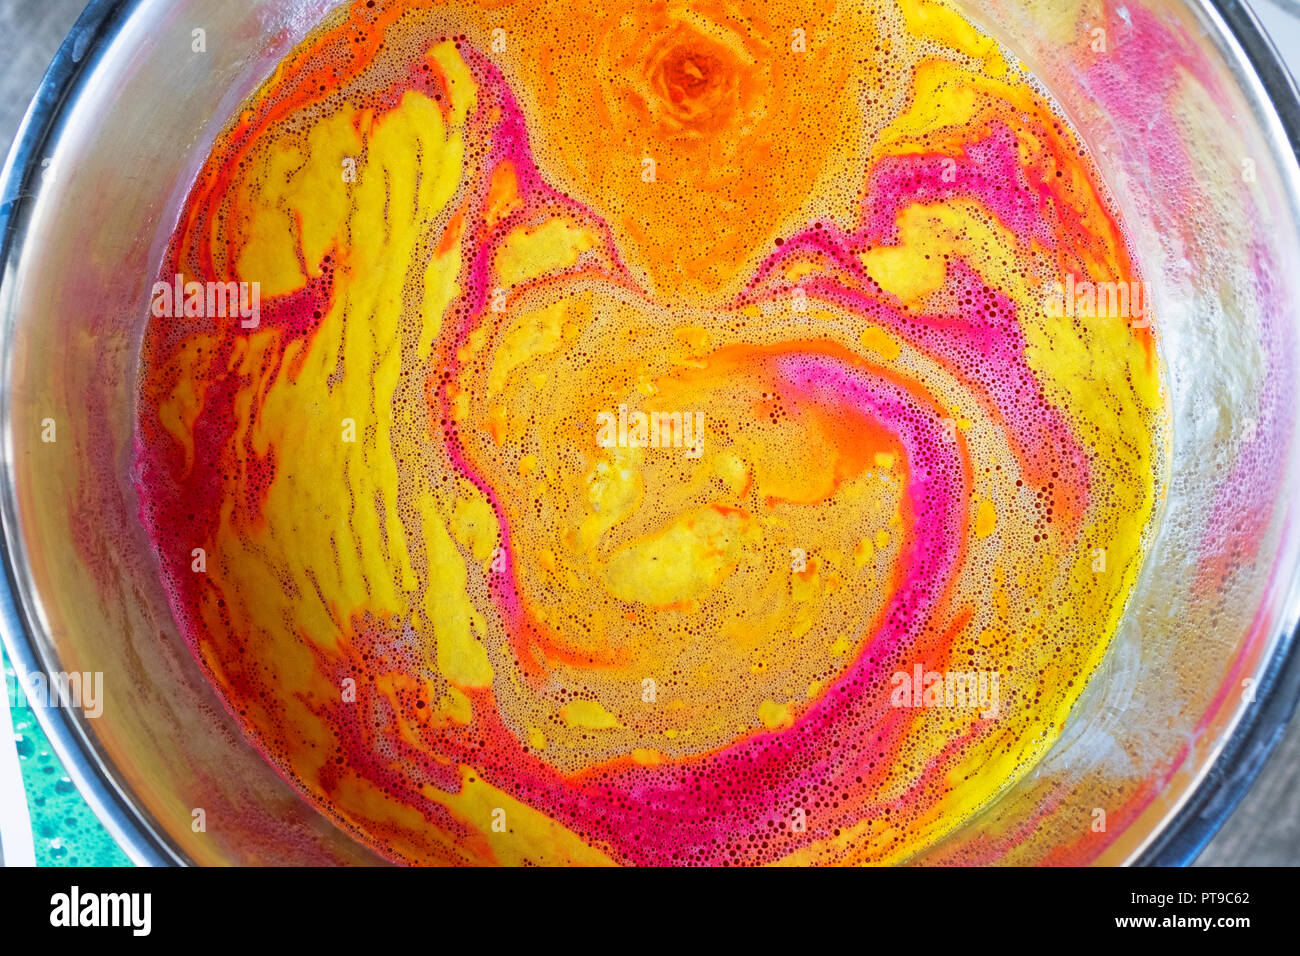 A colorful abstract pattern in a sink formed by putting Lush soap in running water. Outside a Lush store on East 14th Street in Manhattan, New York. Stock Photo